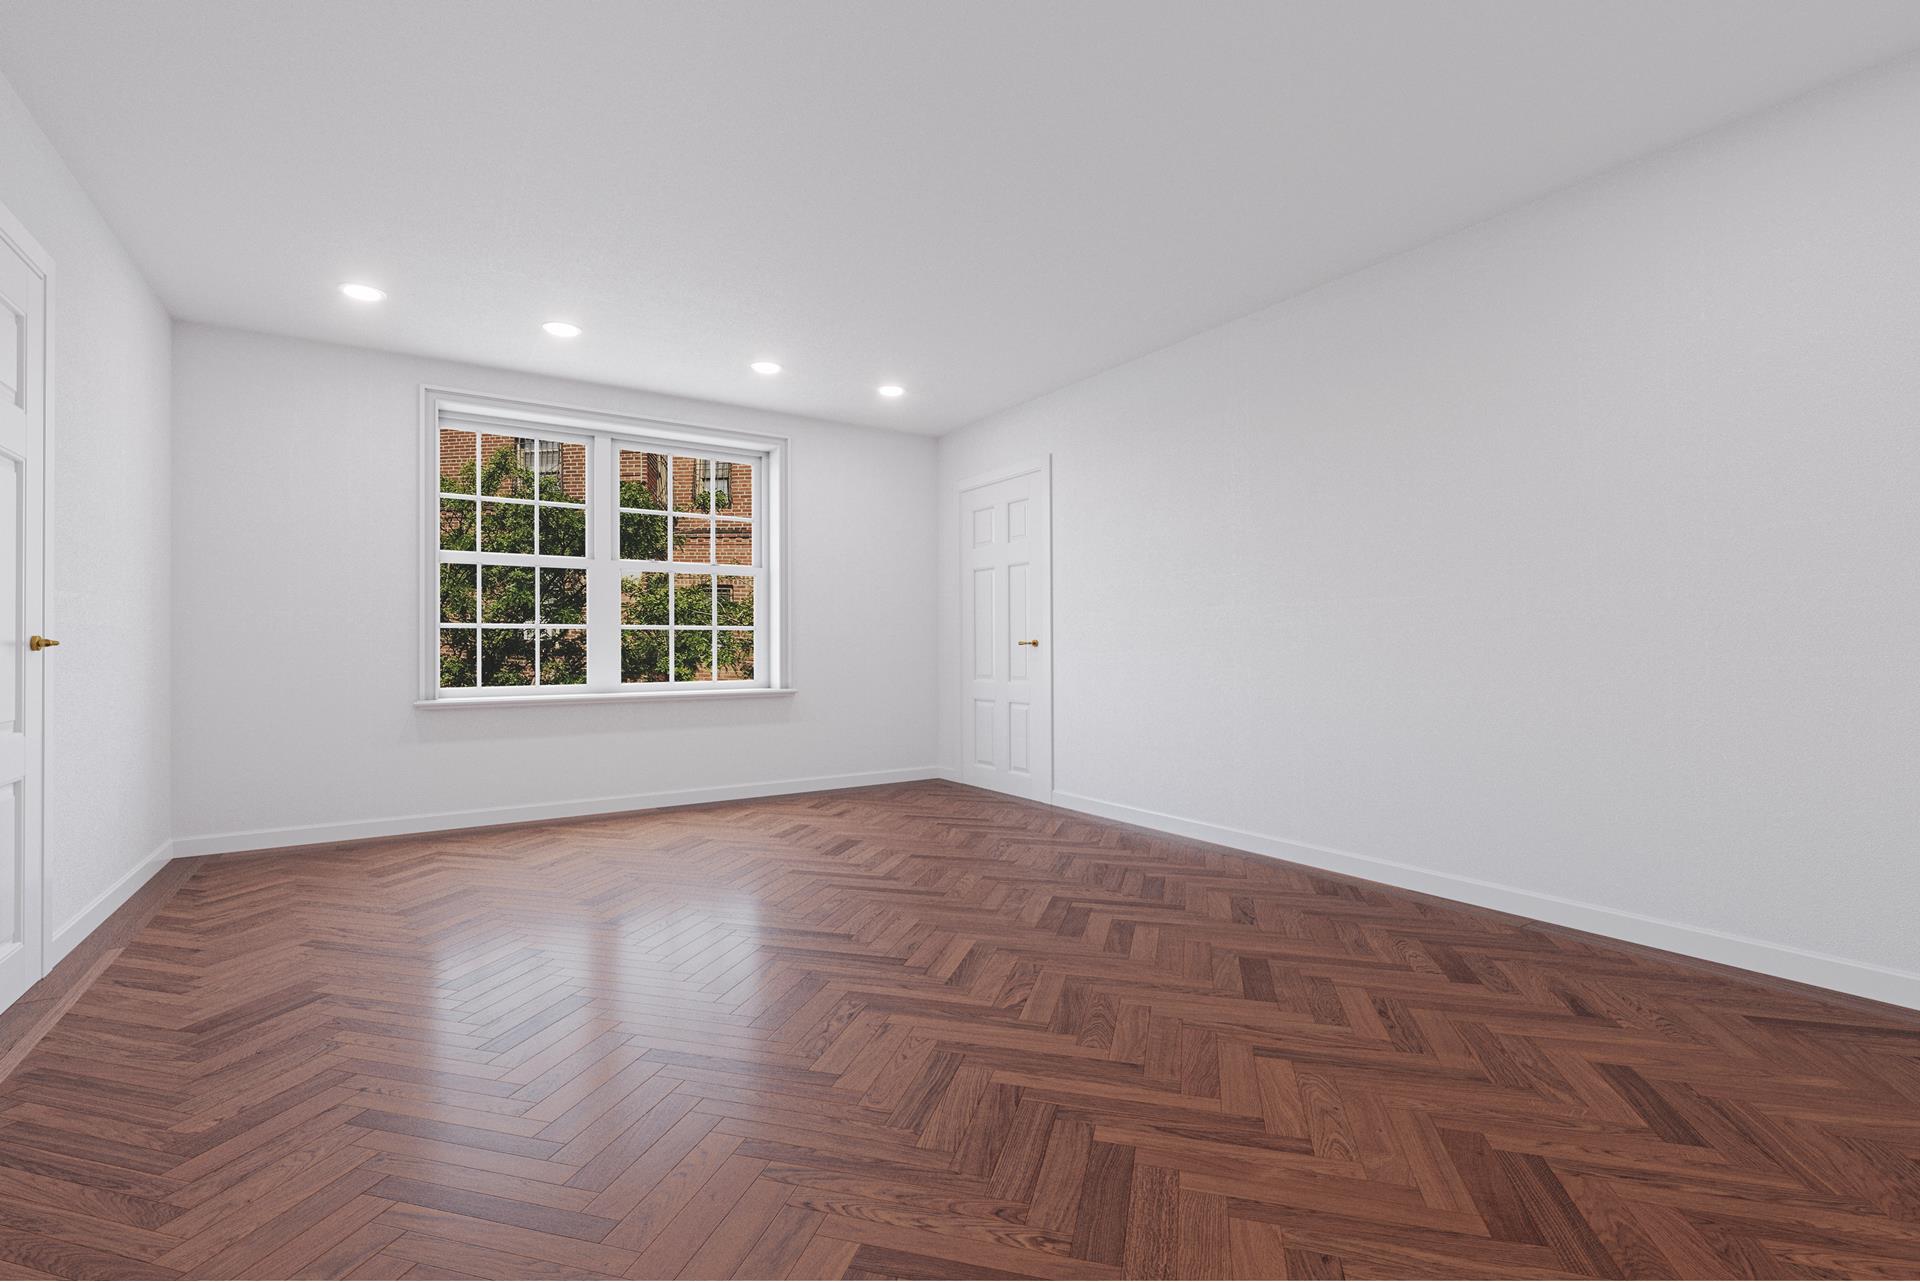 14 Sutton Place 5E, Sutton, Midtown East, NYC - 1 Bedrooms  
1 Bathrooms  
3 Rooms - 